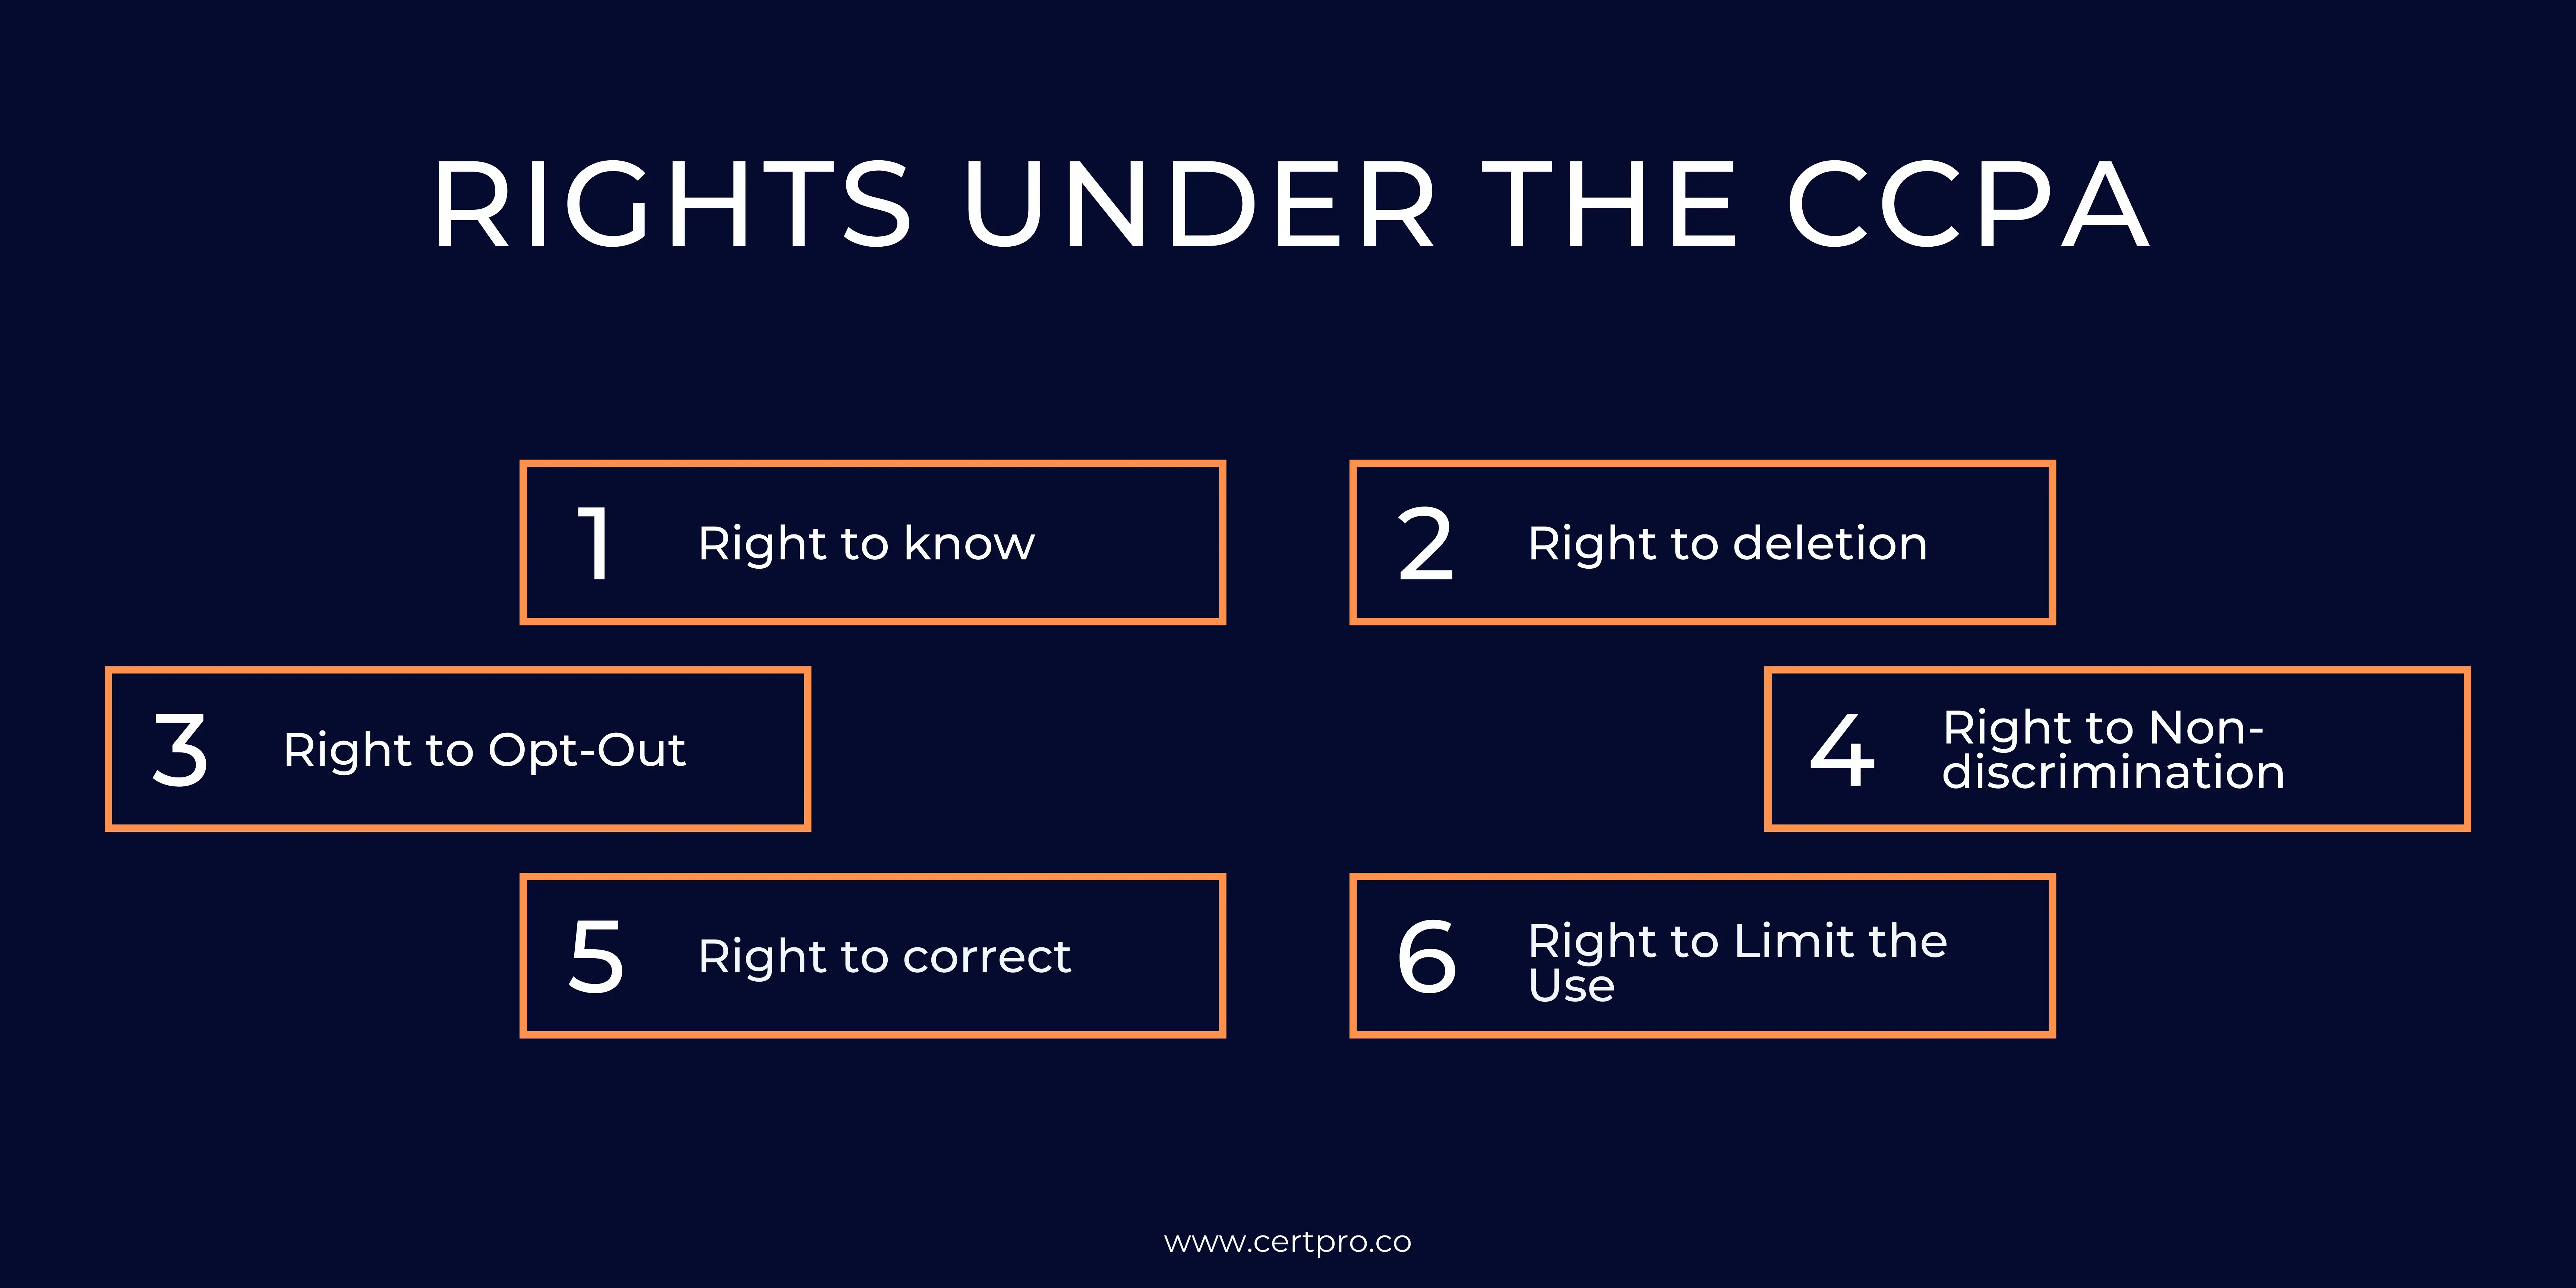 RIGHTS UNDER THE CCPA